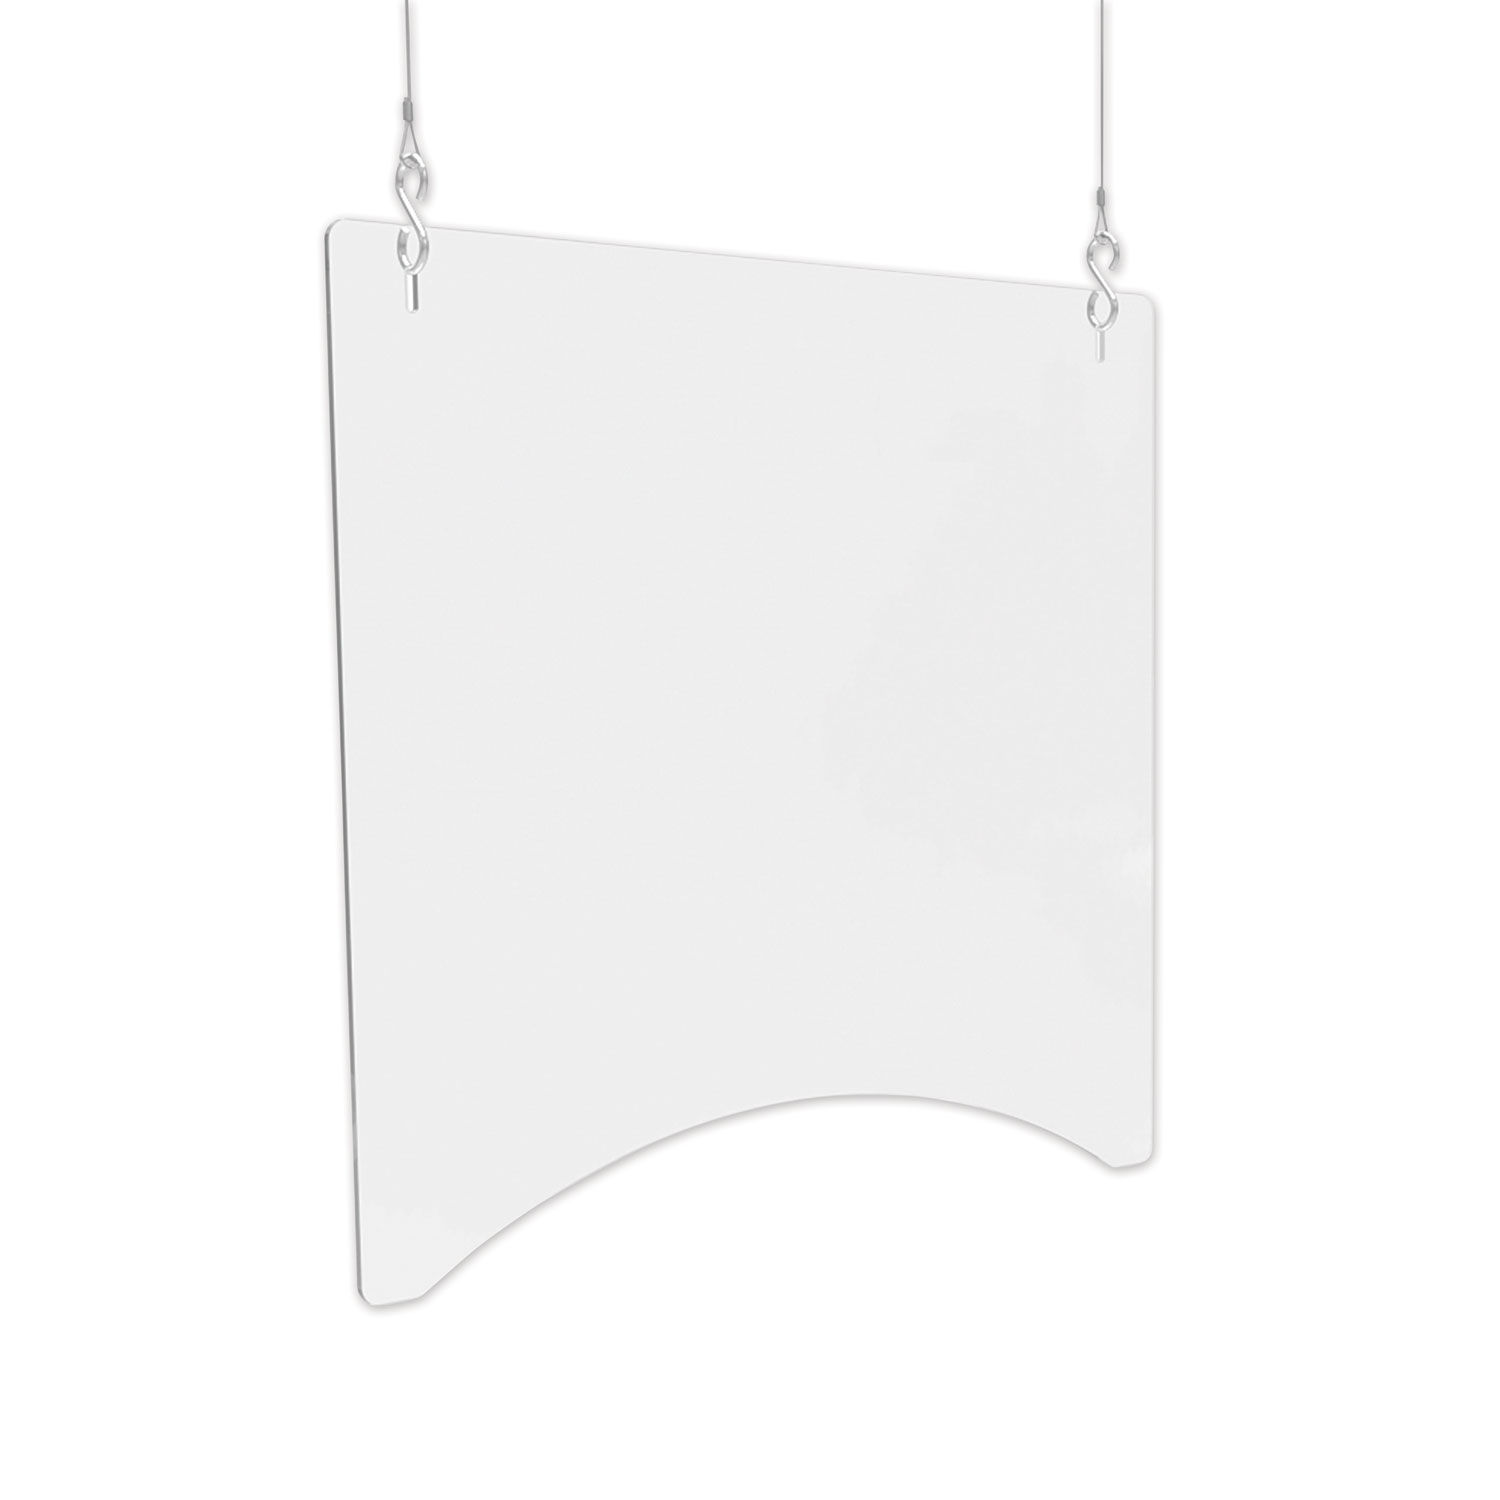 Hanging Barrier 23.75" x 23.75", Polycarbonate, Clear, 2/Carton